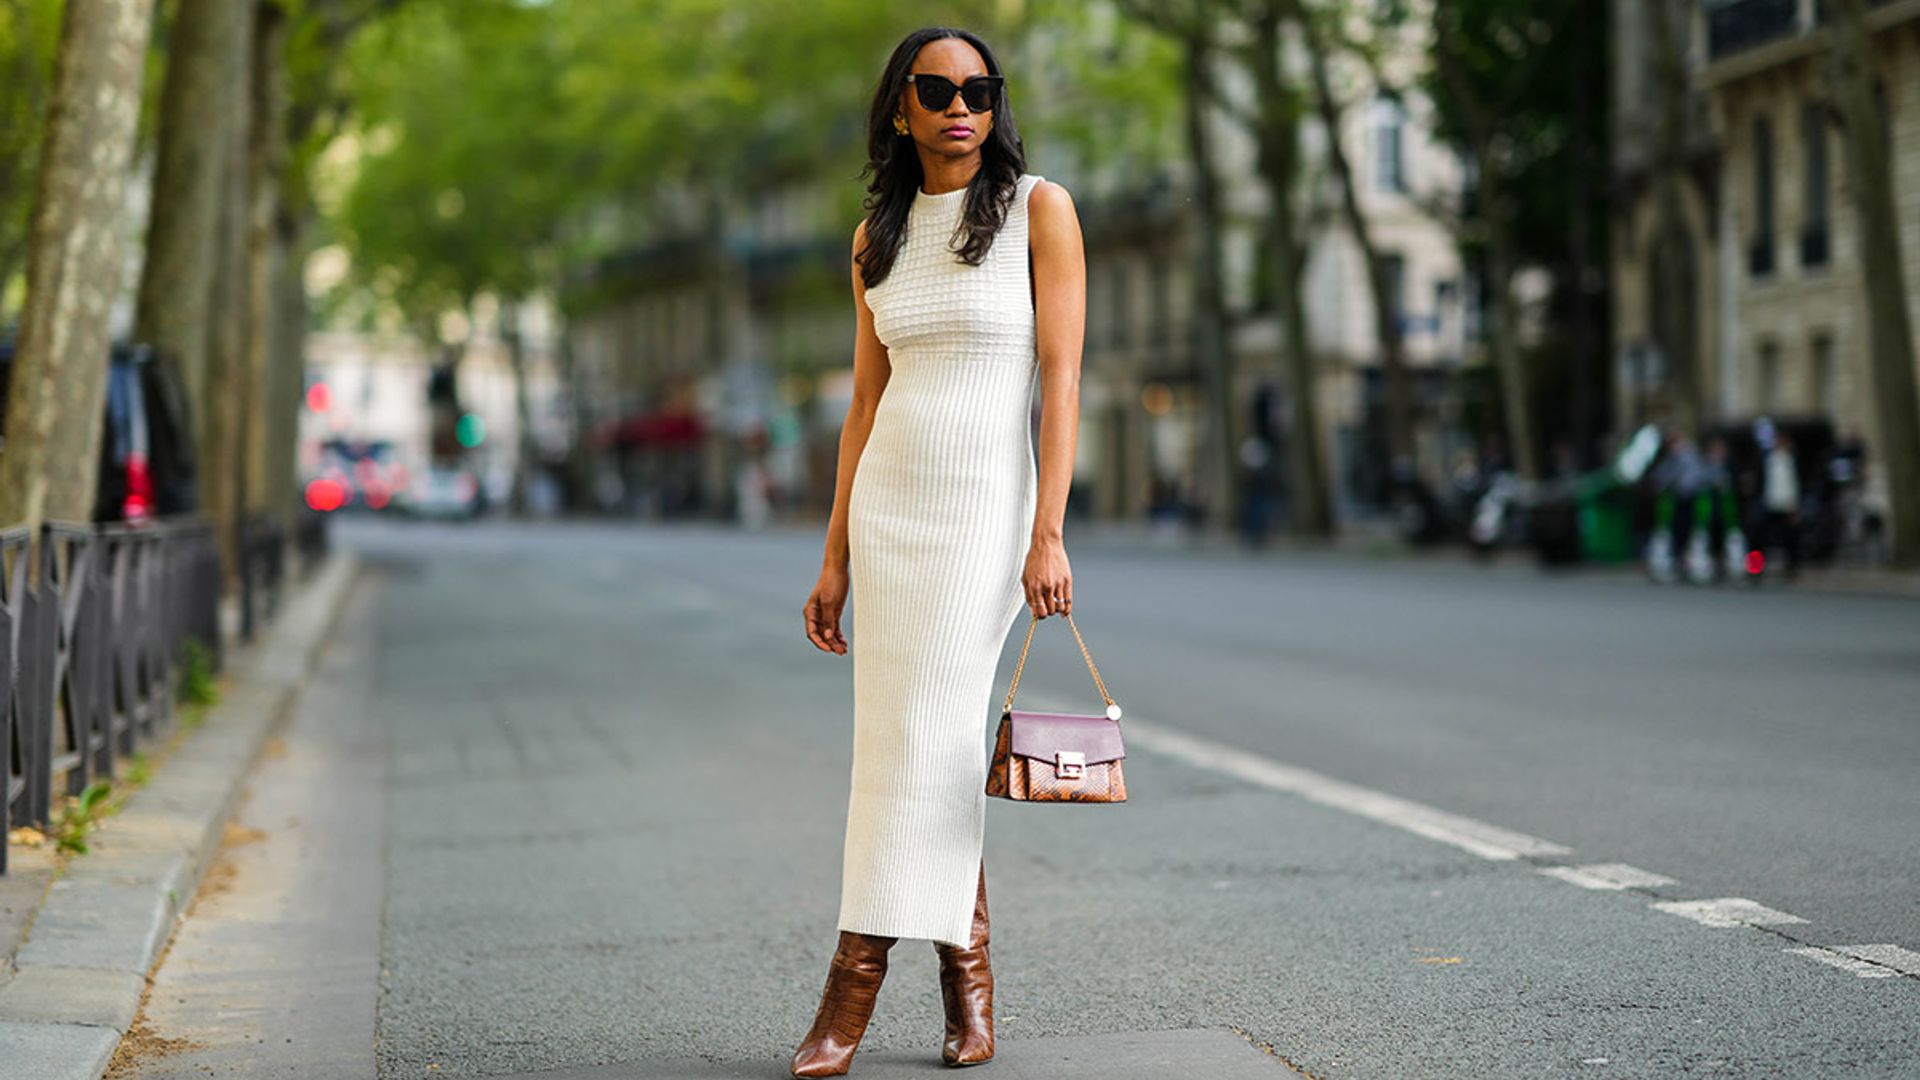 Tank top dresses are the understated summer trend you need in your